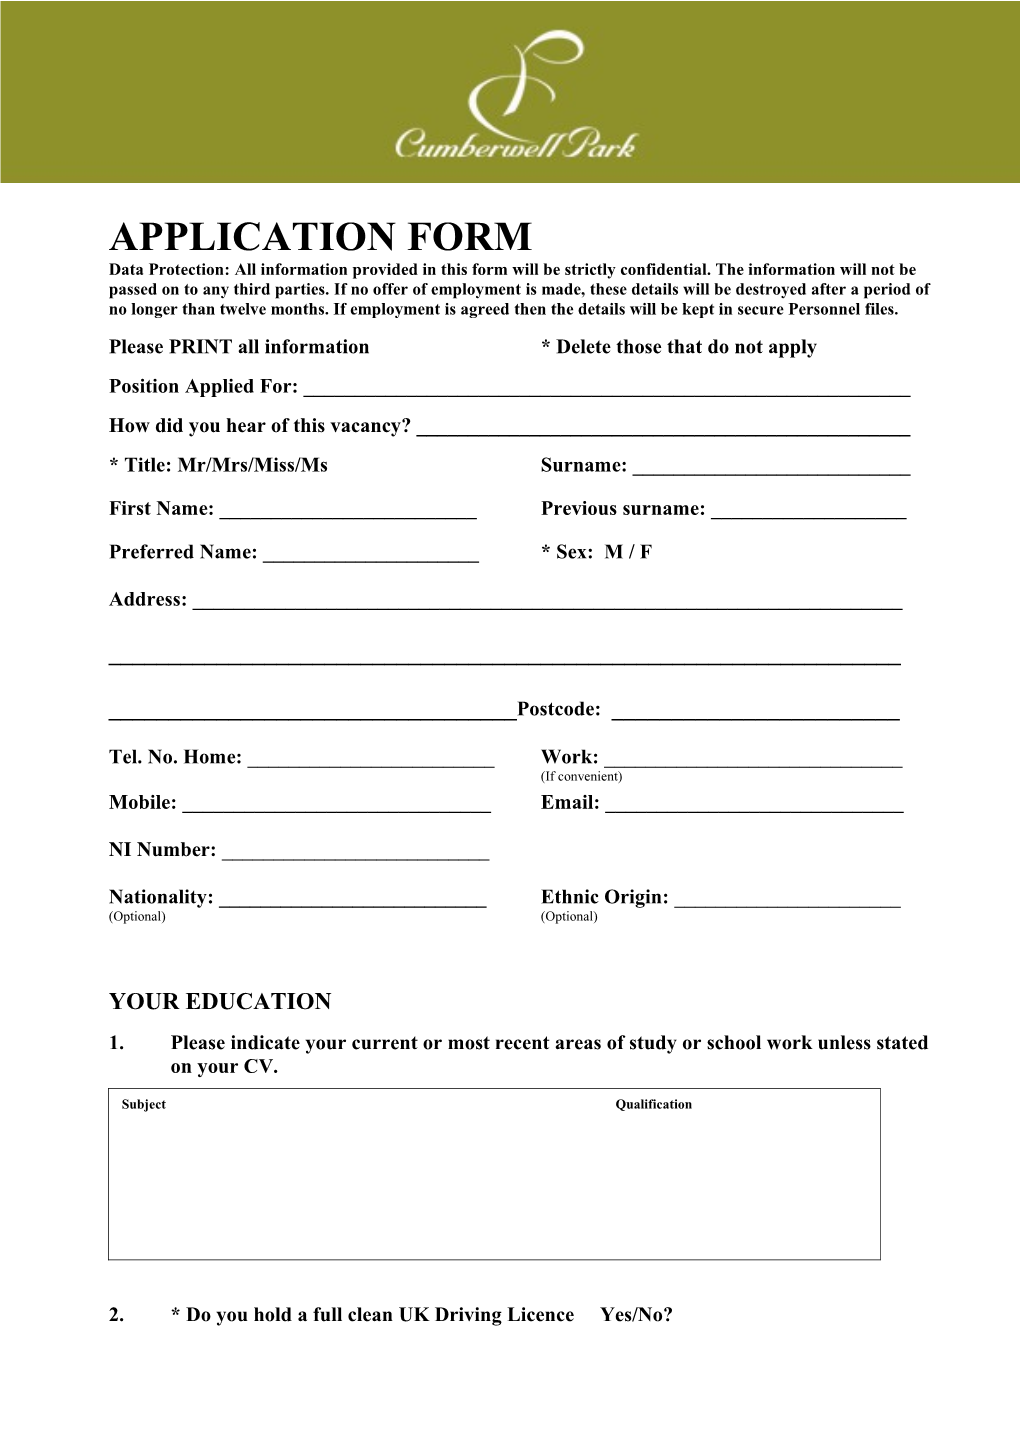 Please PRINT All Information * Delete Those That Do Not Apply